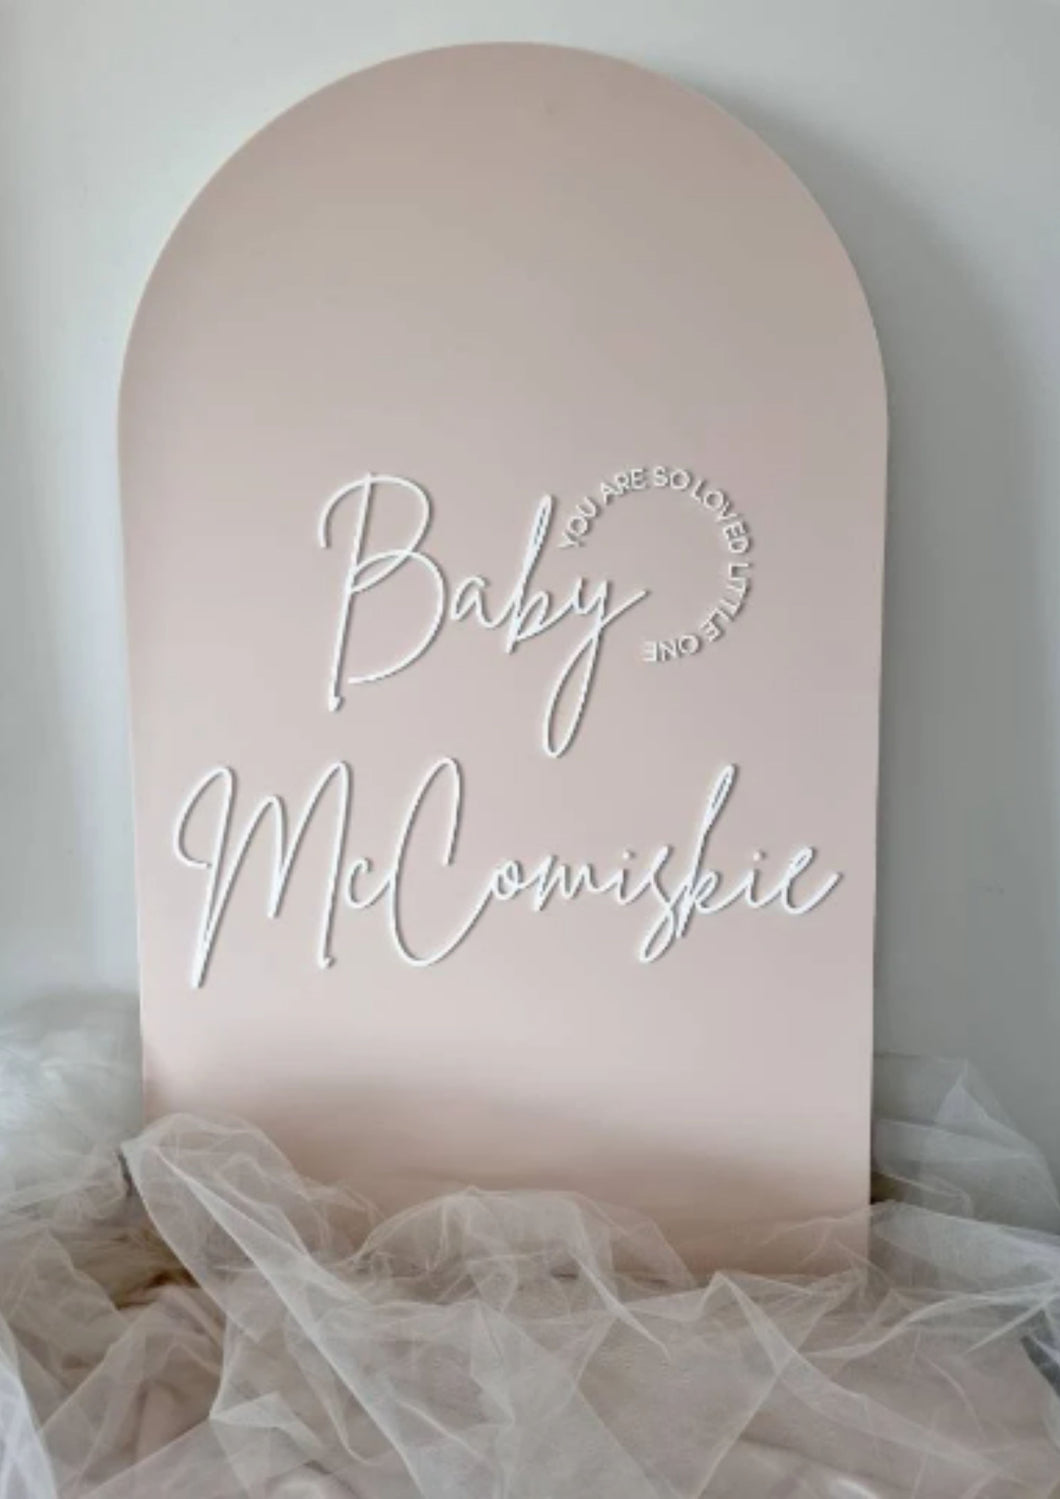 BABY SHOWER SIGN - ARCH